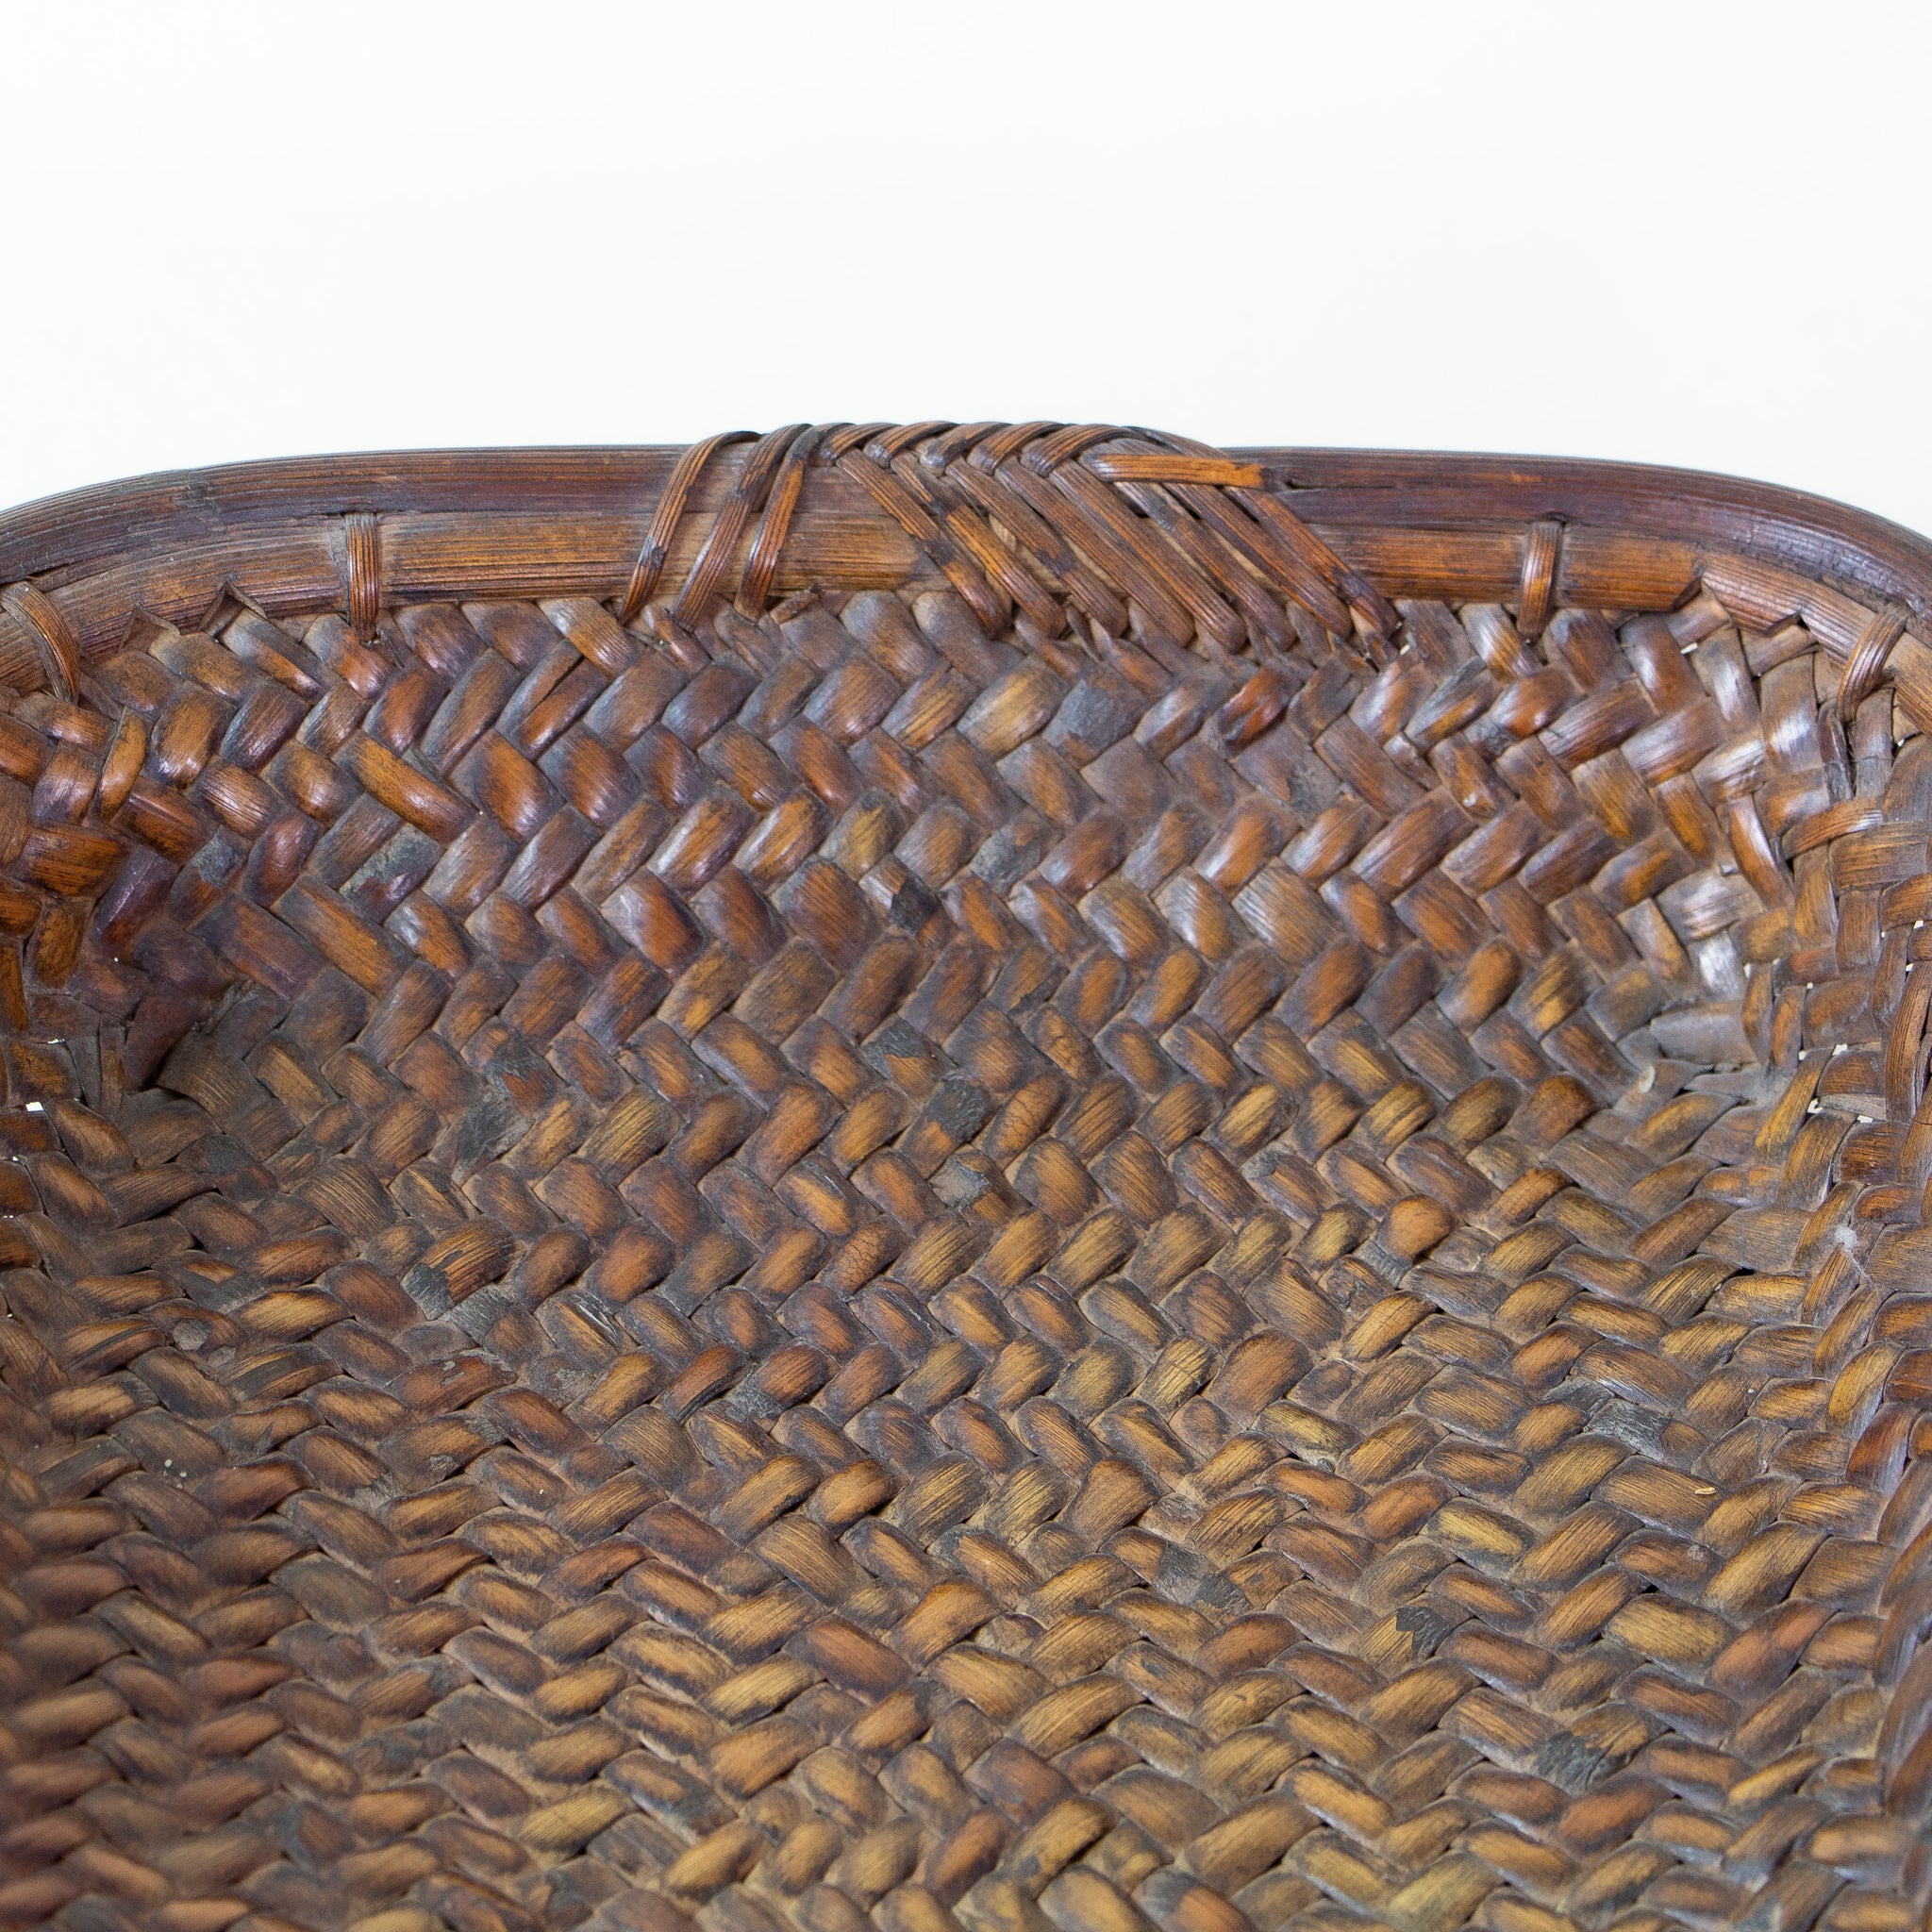 Vintage Filipino Woven Rattan and Wooden Basket